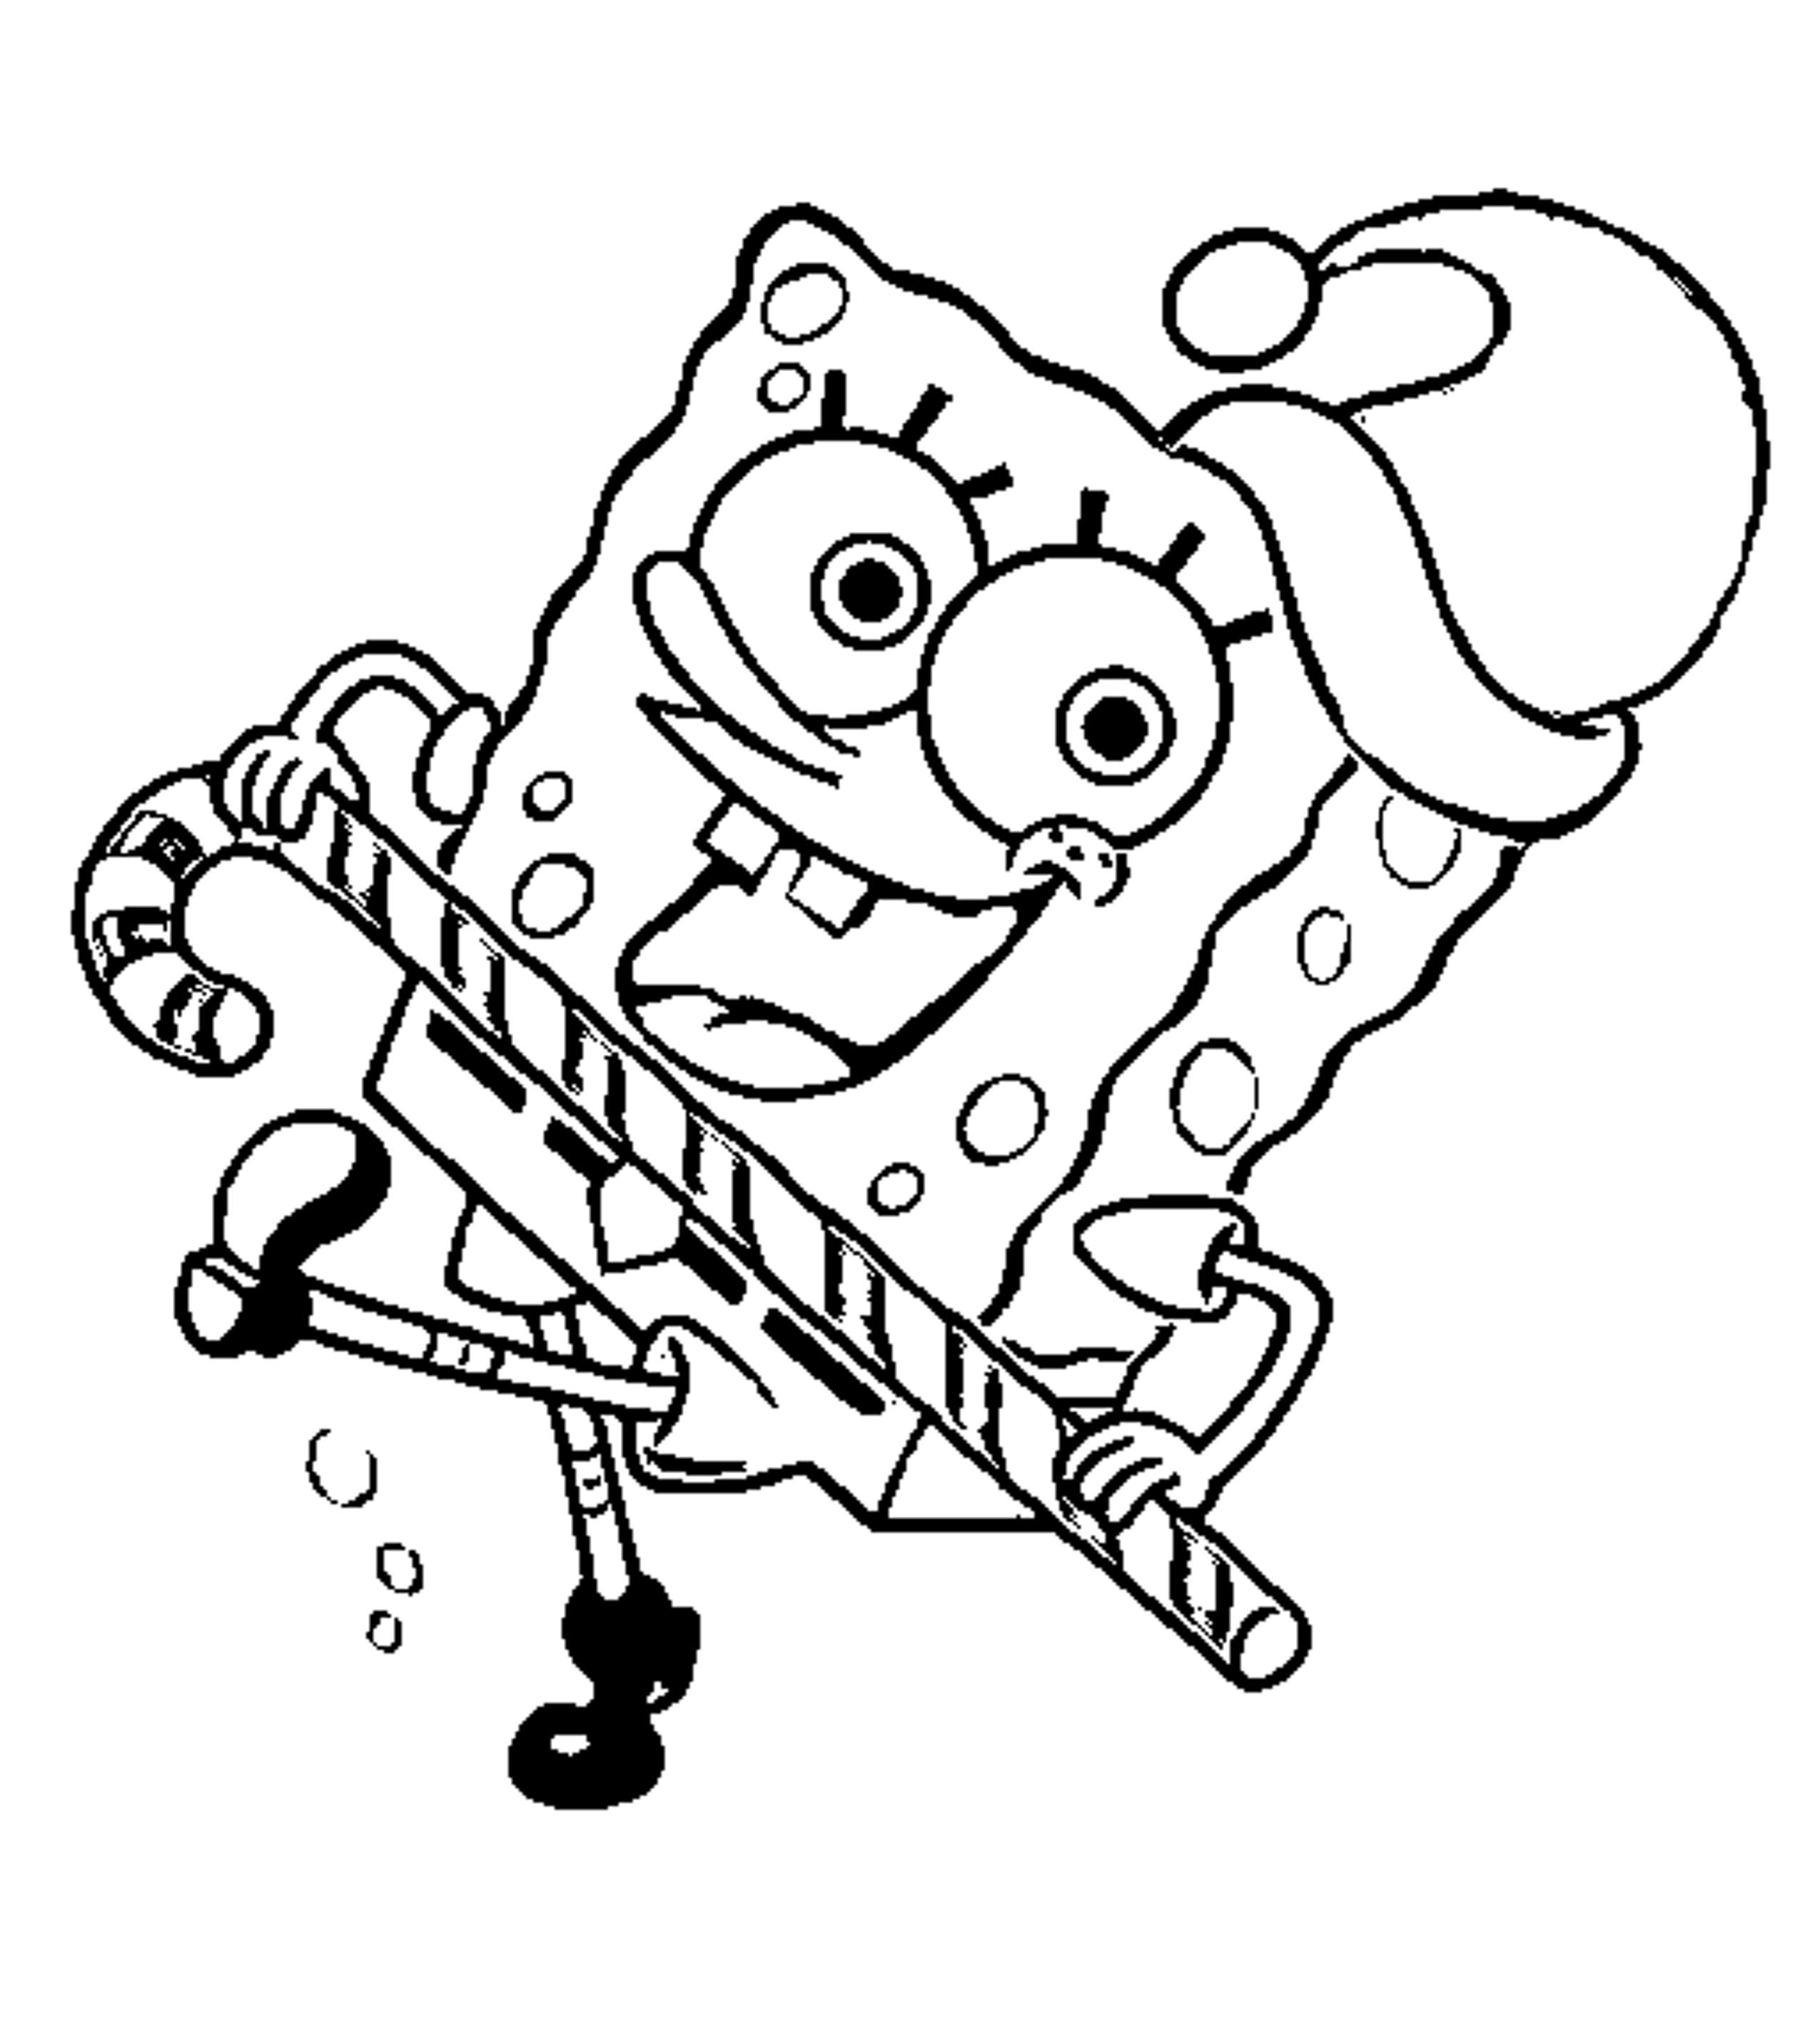 Patrick Spongebob Color Page Cartoon Characters Coloring Pages ...